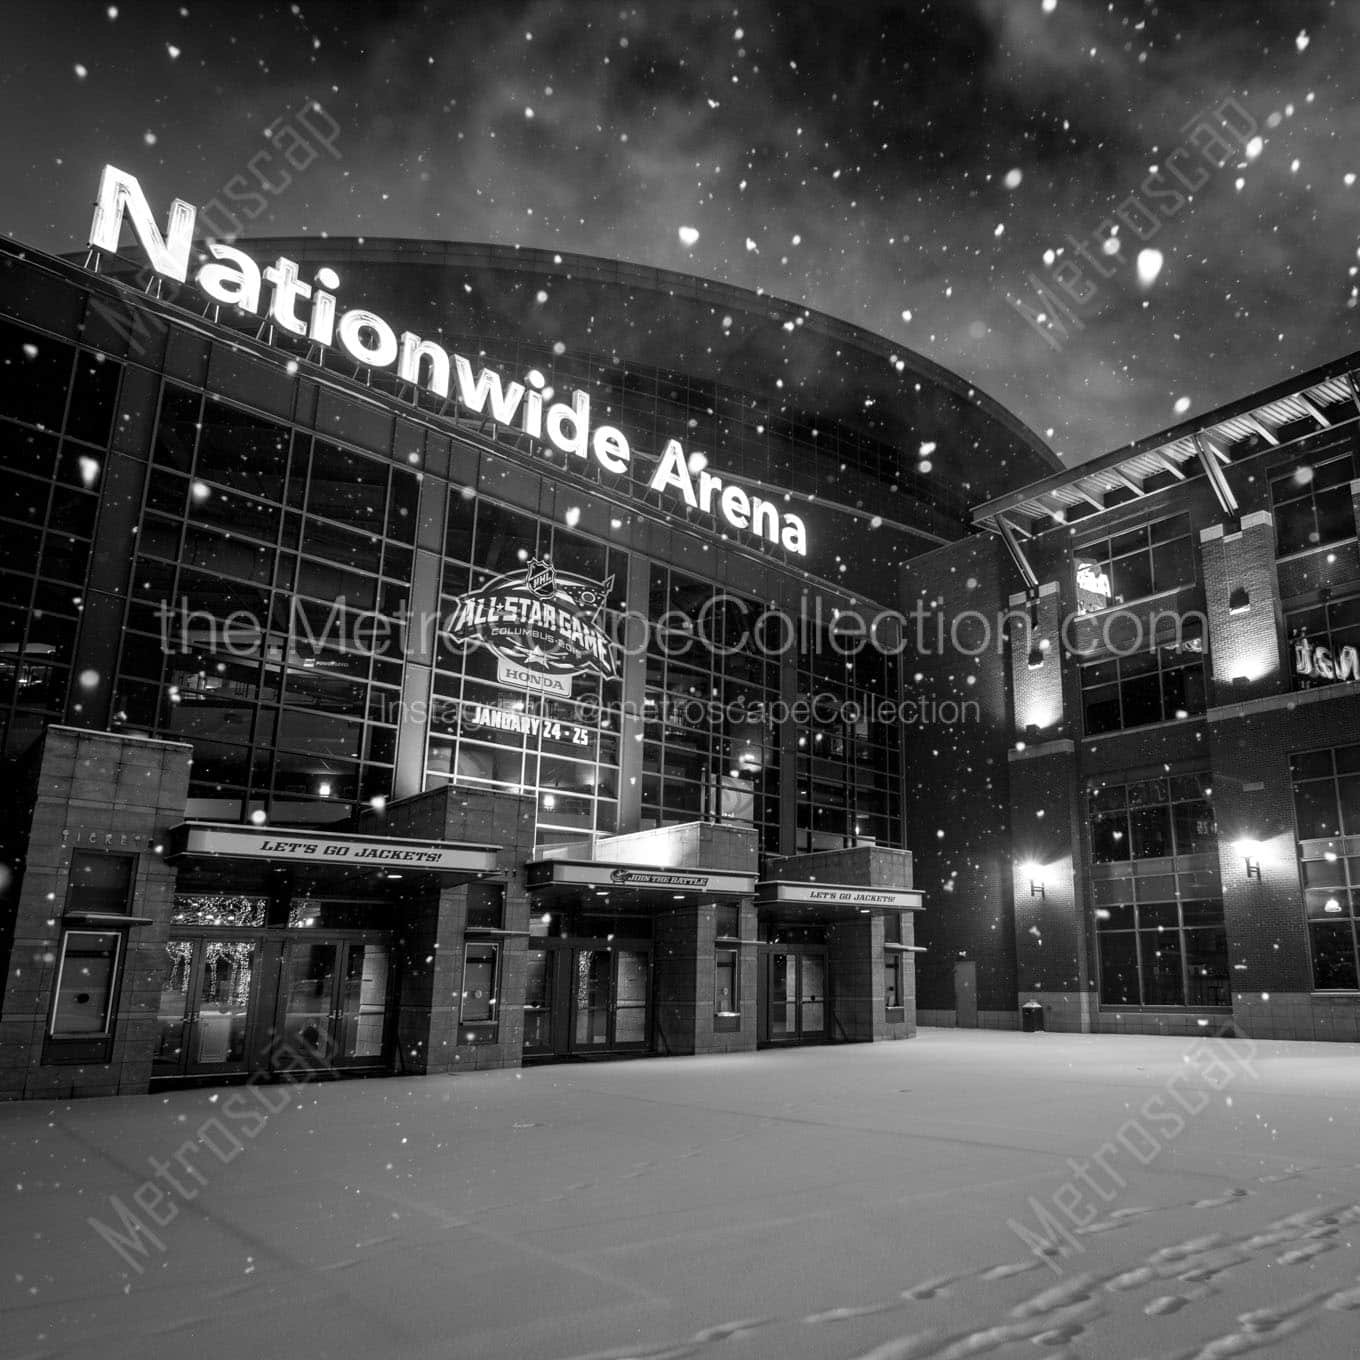 nationwide arena at night snowfall Black & White Office Art